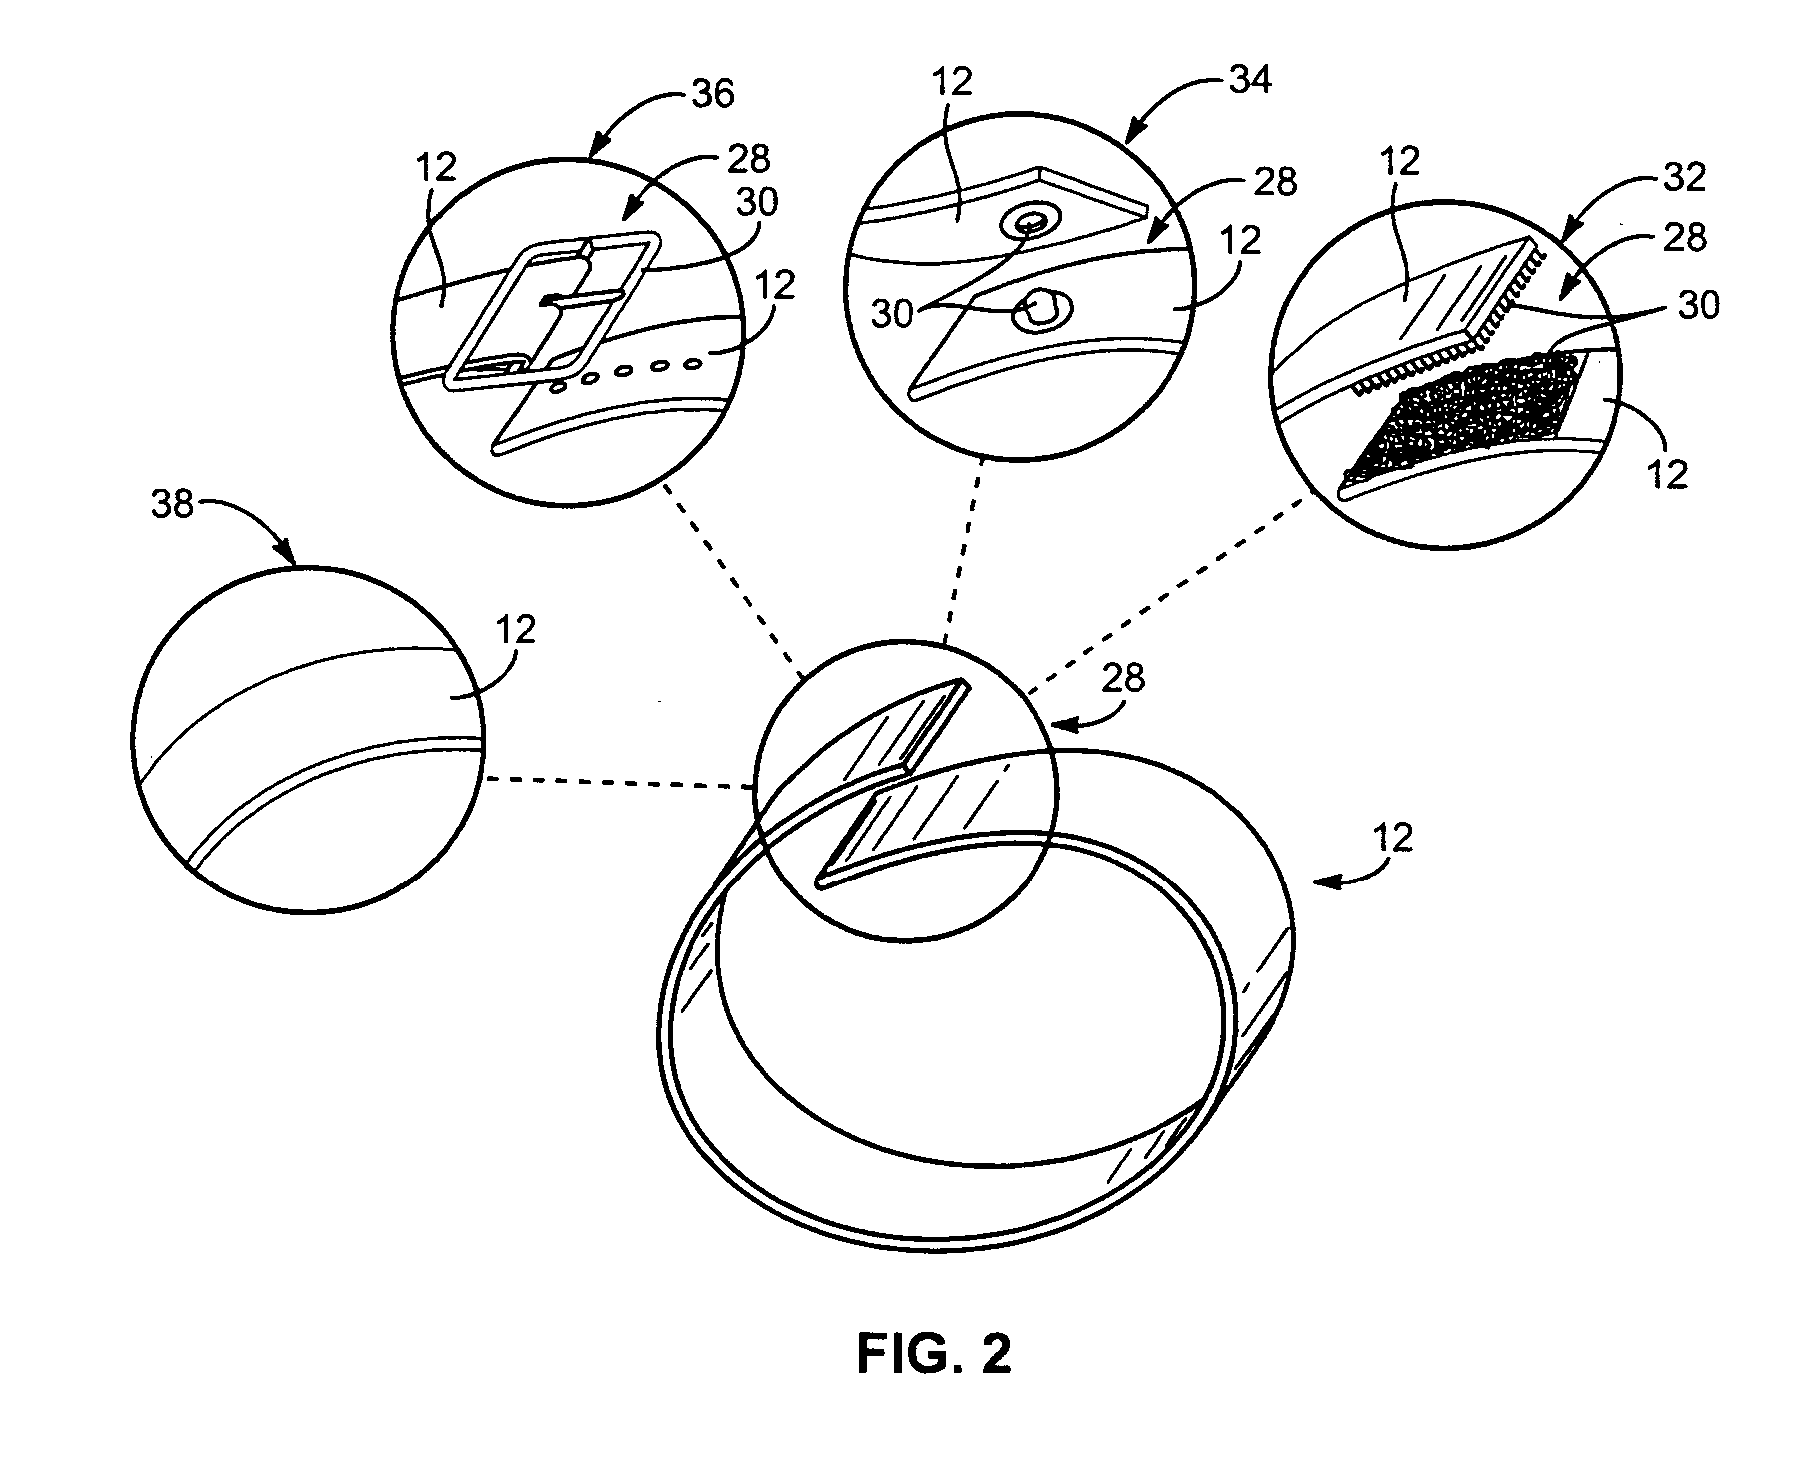 Continuously variable, closed loop, instrument tether